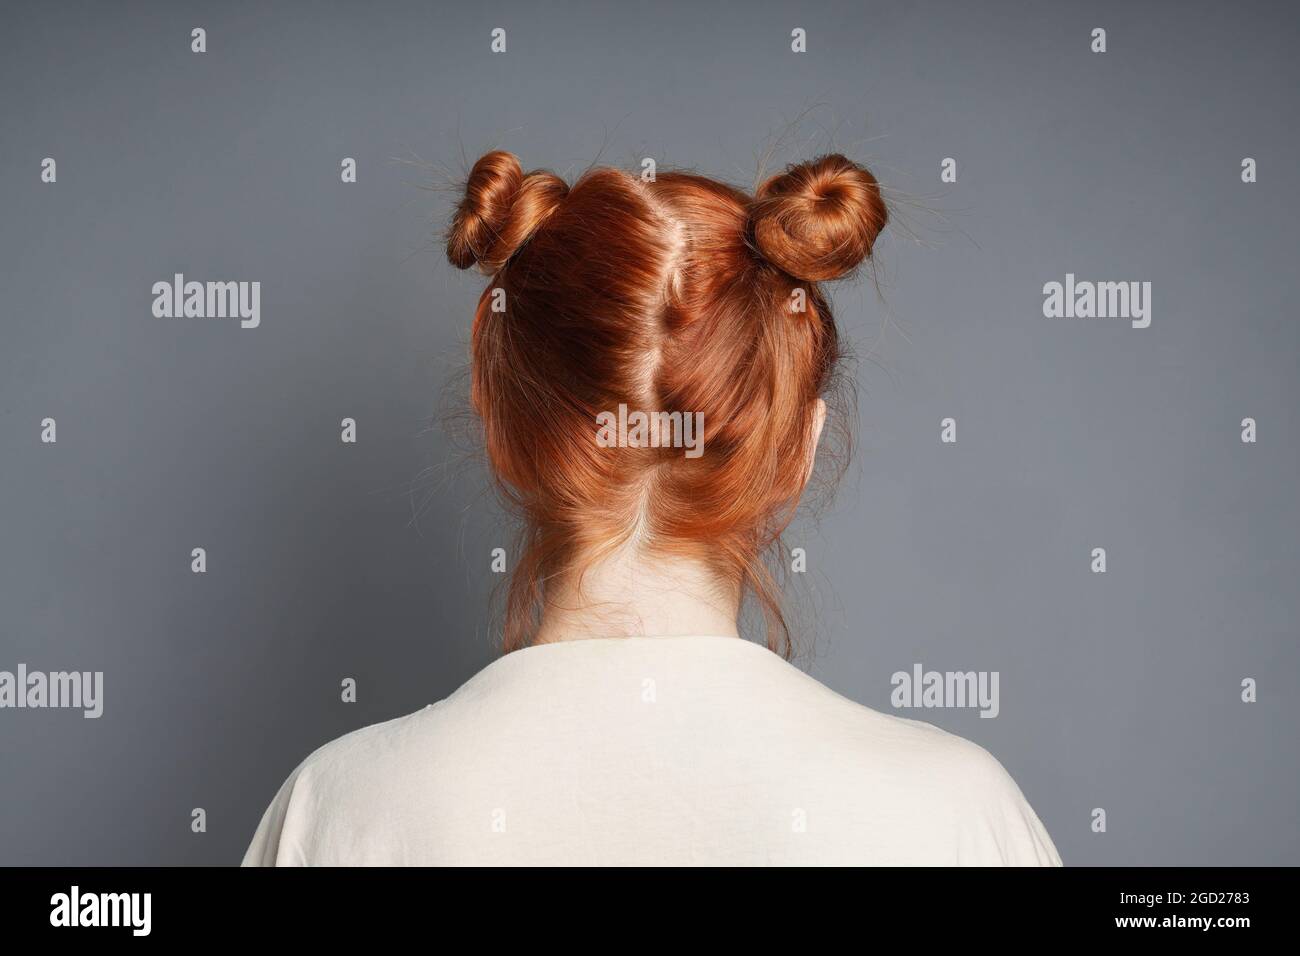 back view of red-haired woman with space buns hairstyle Stock Photo